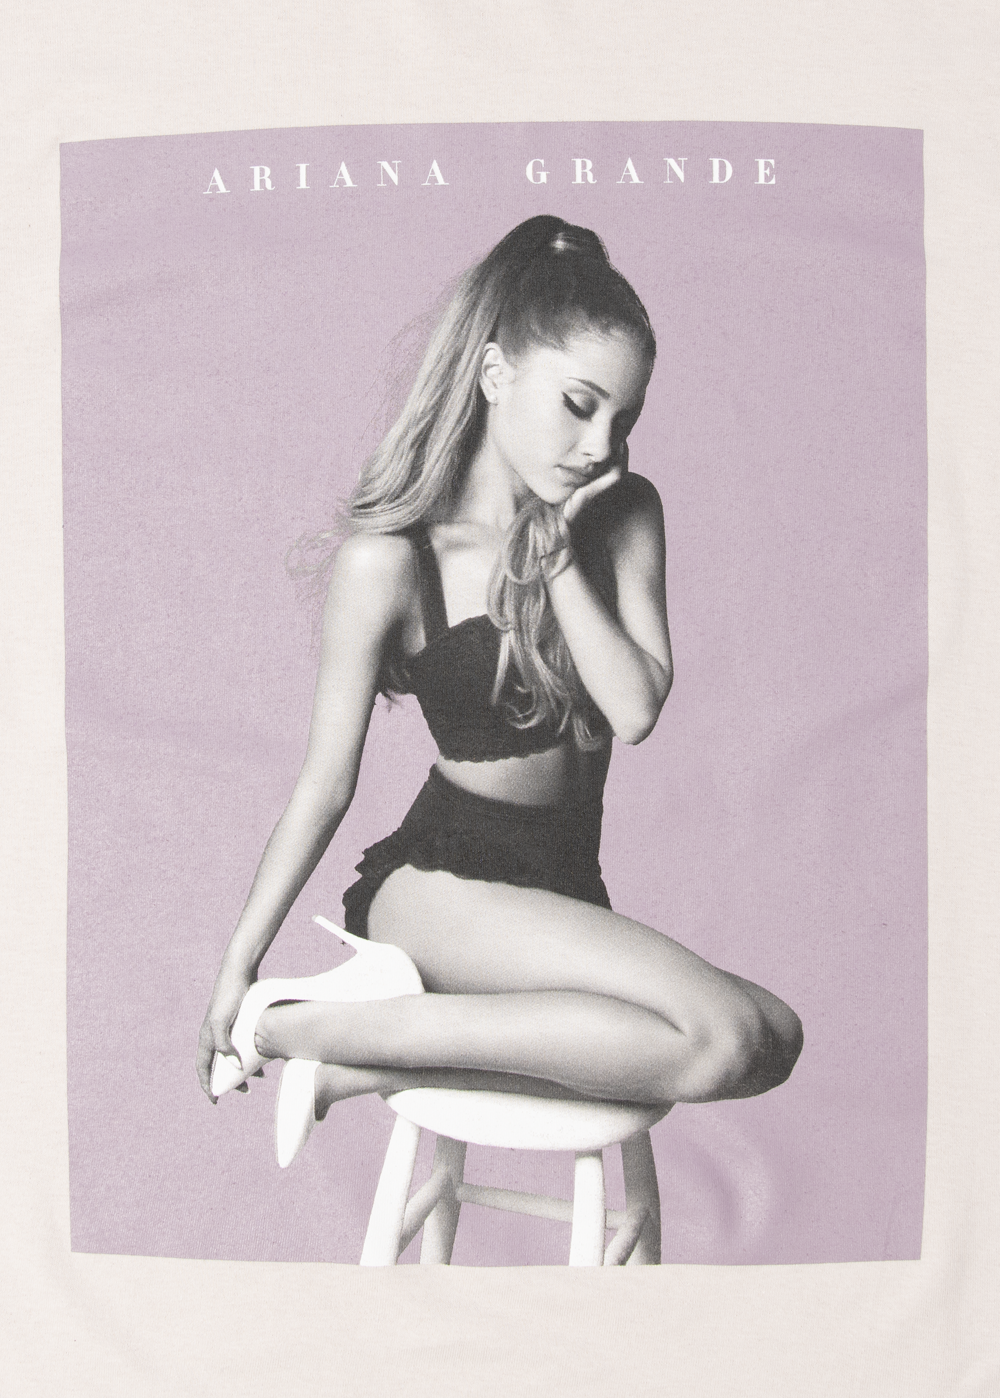 my everything lilac poster t-shirt detail